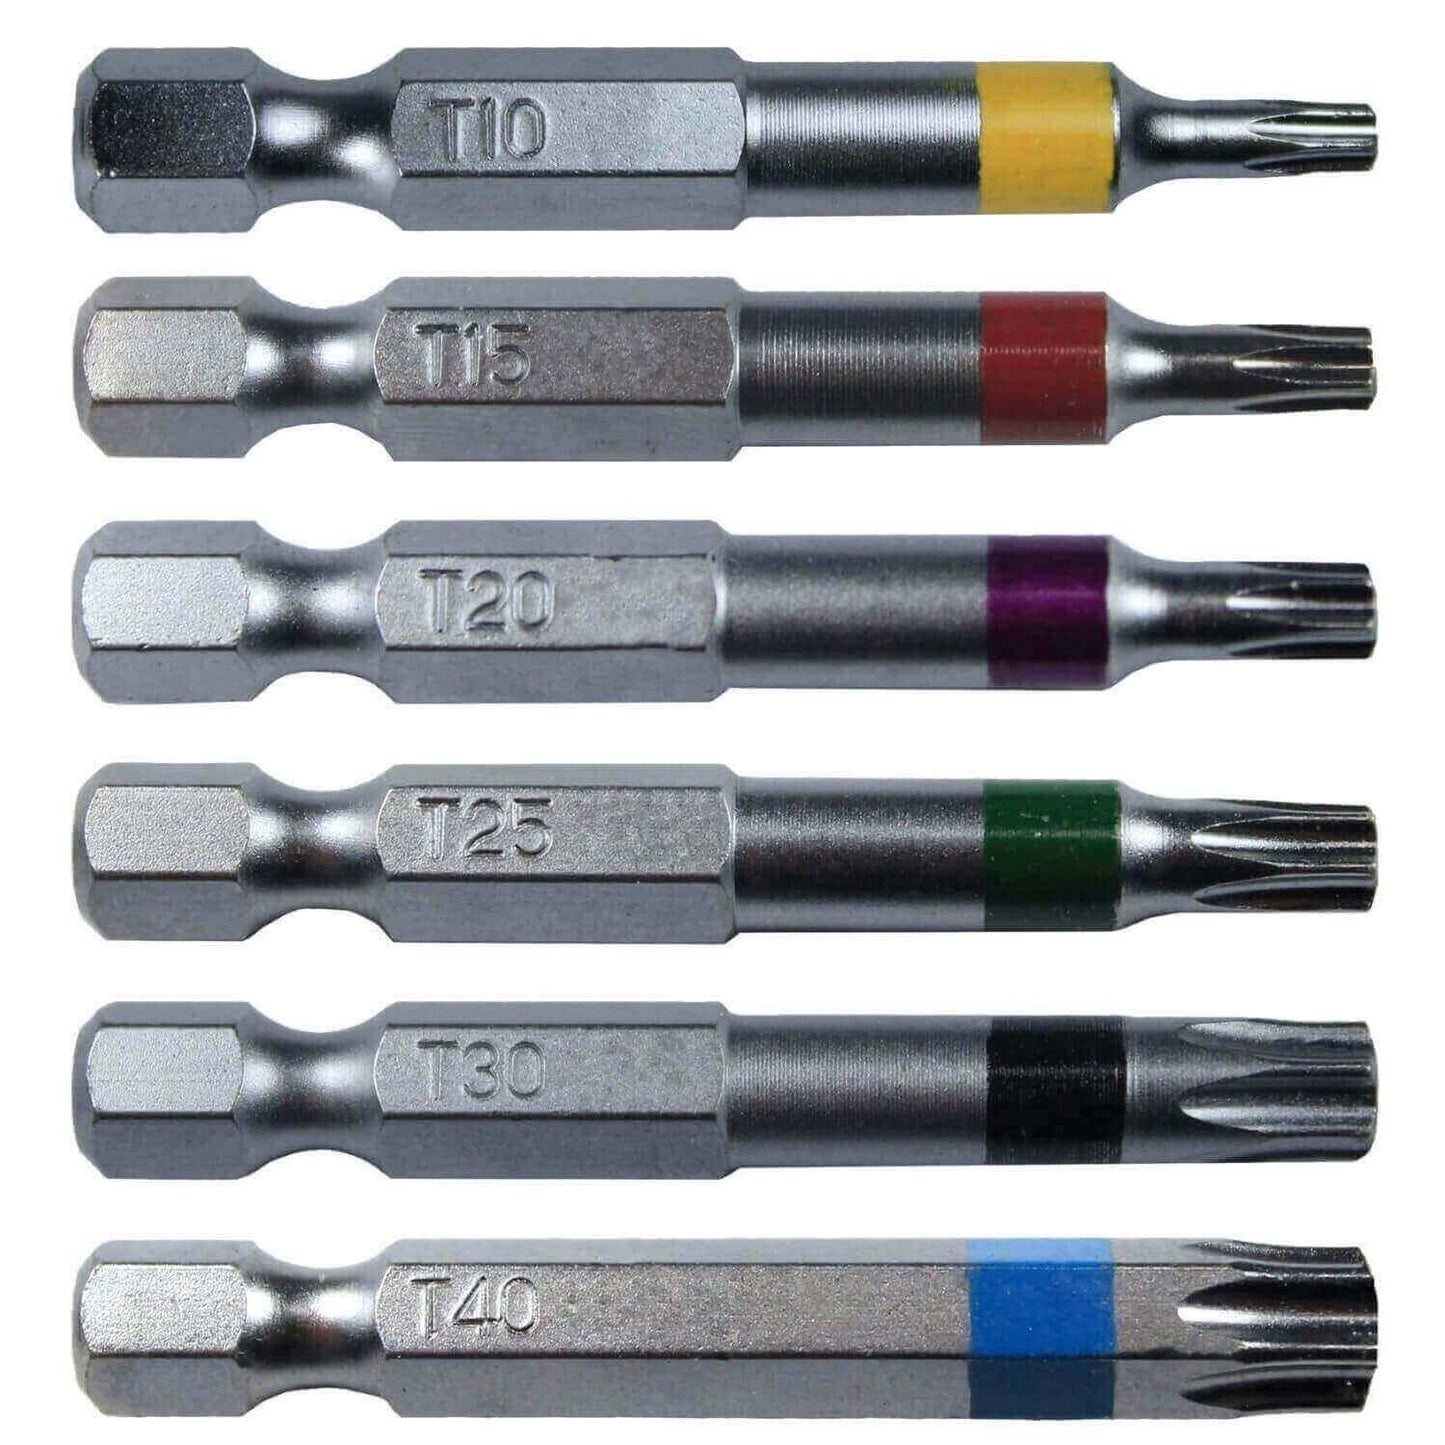 Torx/Star Driver Bit Sets. Quick Change Shanks in One and Two Inch Lengths